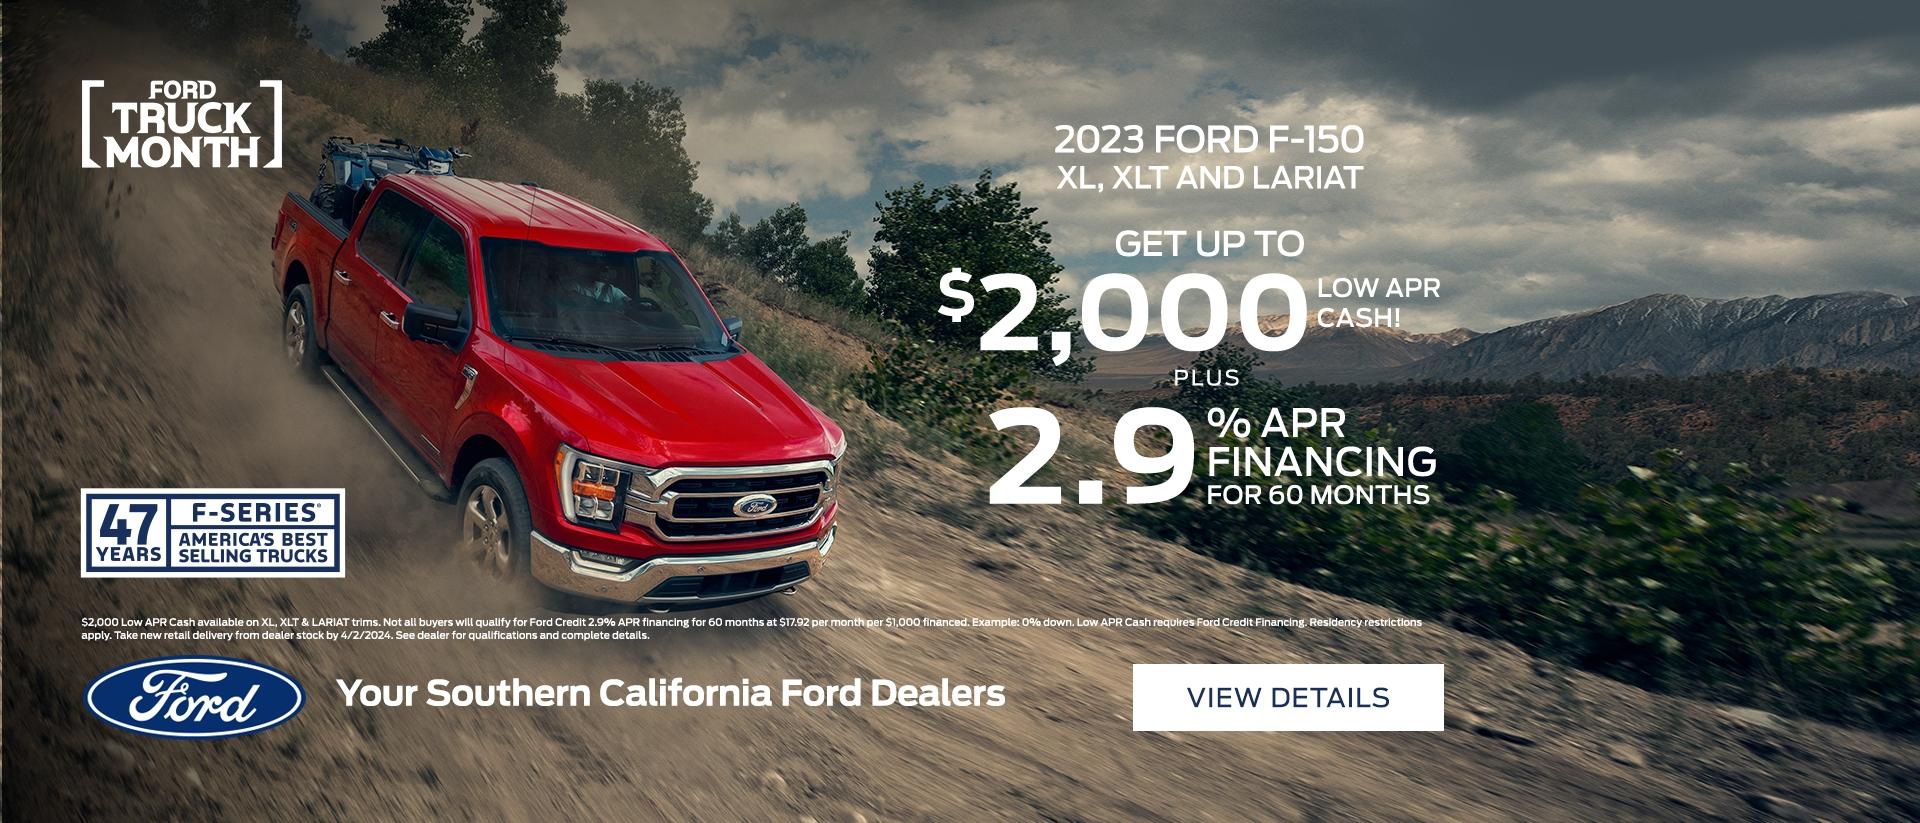 2023 Ford F-150 Purchase Offer | Southern California Ford Dealers